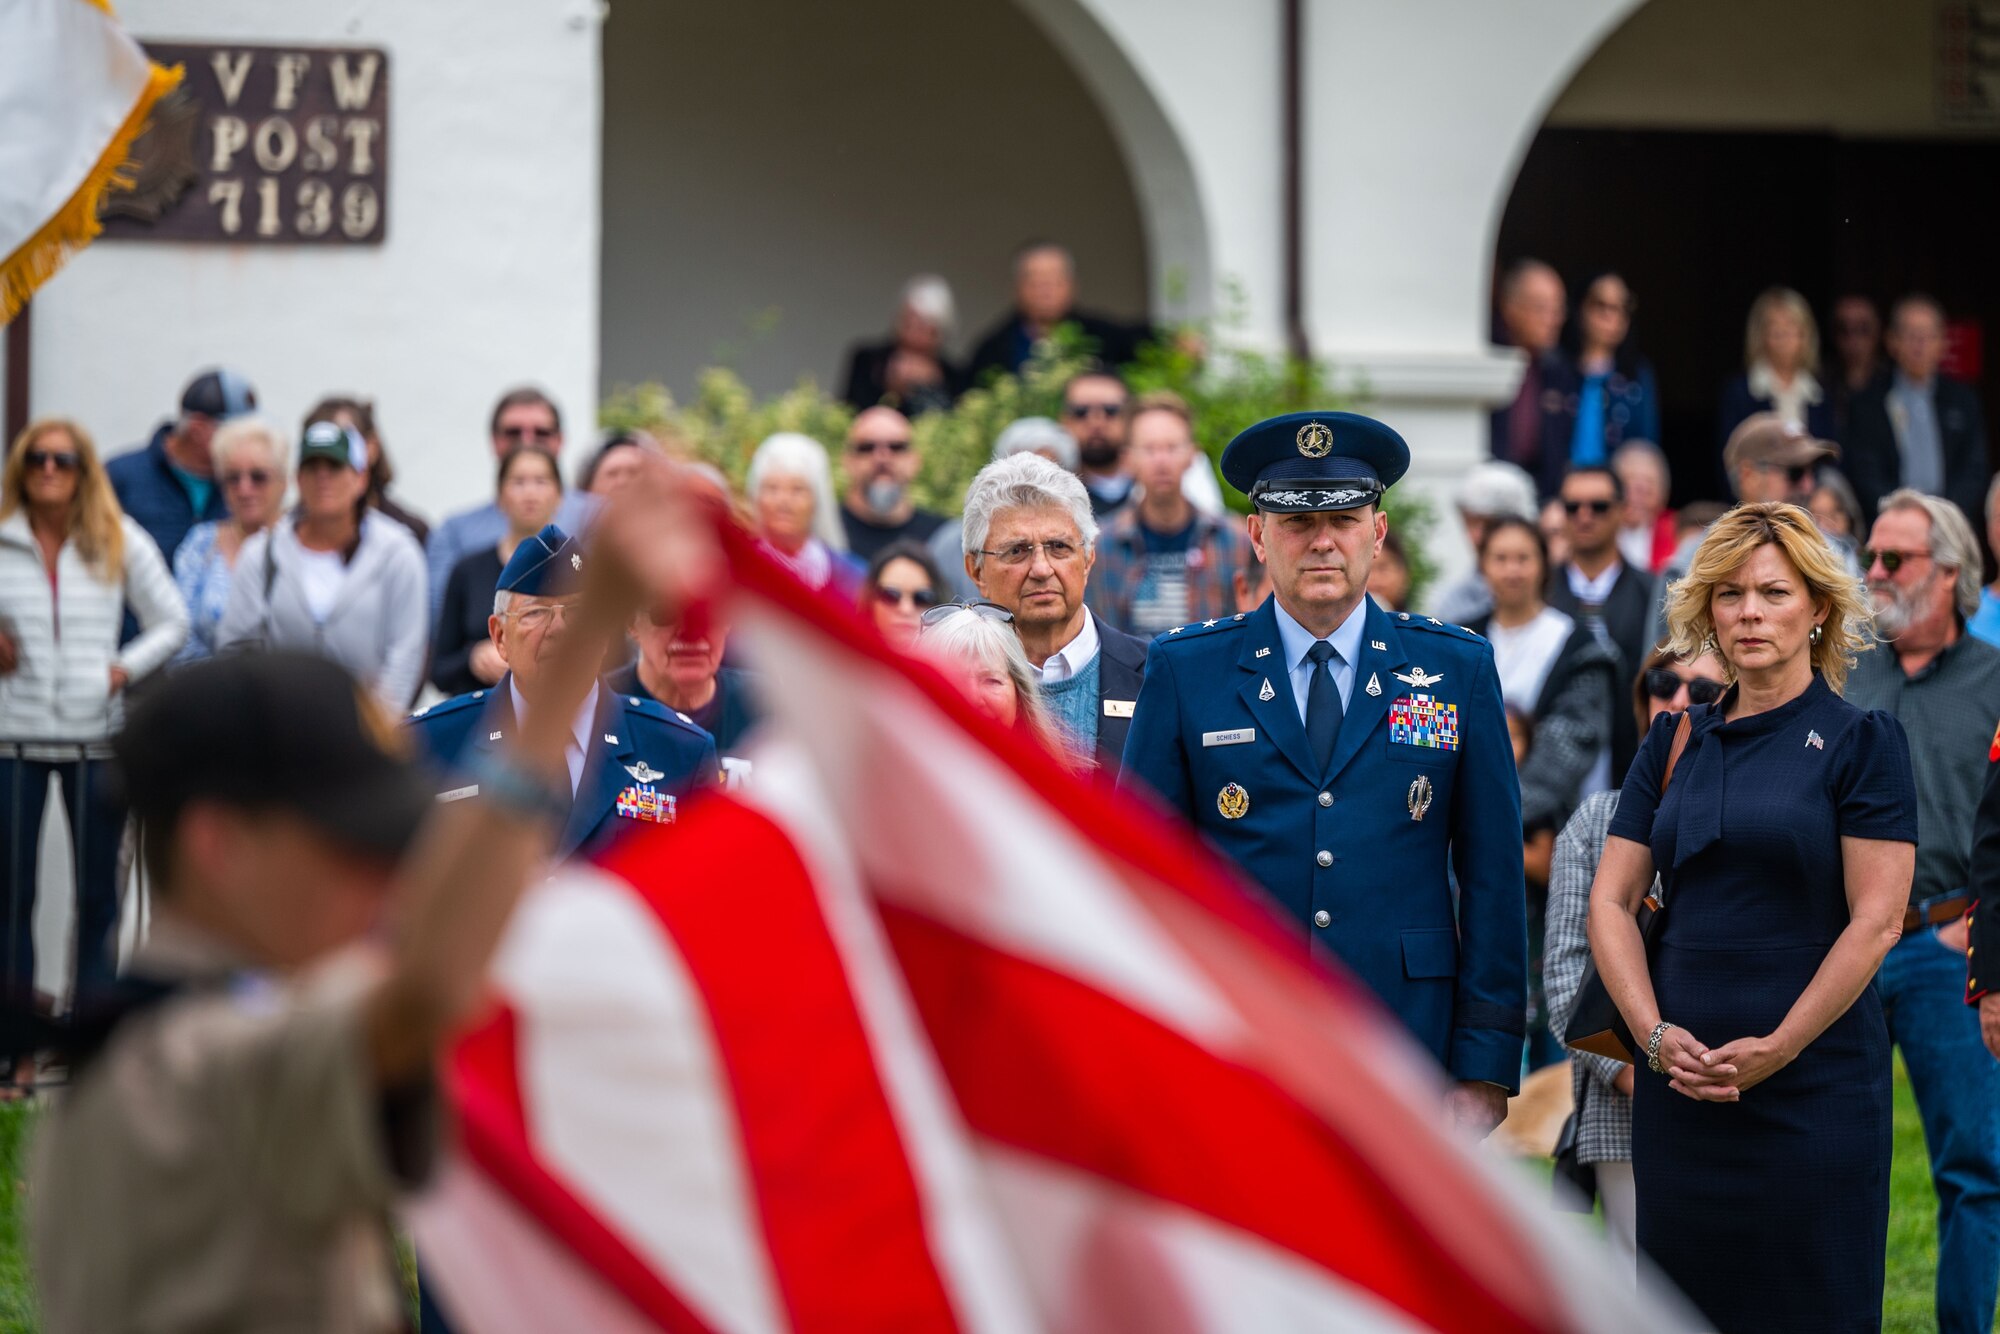 U.S. Space Force Maj. Gen. Douglas A. Schiess, Combined Force Space Component Command commander, middle, and Mrs. Debbie Schiess, right, watch with other attendees to the raising of the American flag during a Memorial Day ceremony at the Solvang Veterans Memorial Hall in Solvang, Calif., May 29, 2023. General Schiess gave the keynote speech to over 200 attendees that included veterans from the Global War on Terrorism, Vietnam, Korea and even one veteran from WWII. The ceremony also included the raising on the American Flag by a local Cub Scouts group and a laying of a wreath with a Gold Star family member. (U.S. Space Force photo by Tech. Sgt. Luke Kitterman)